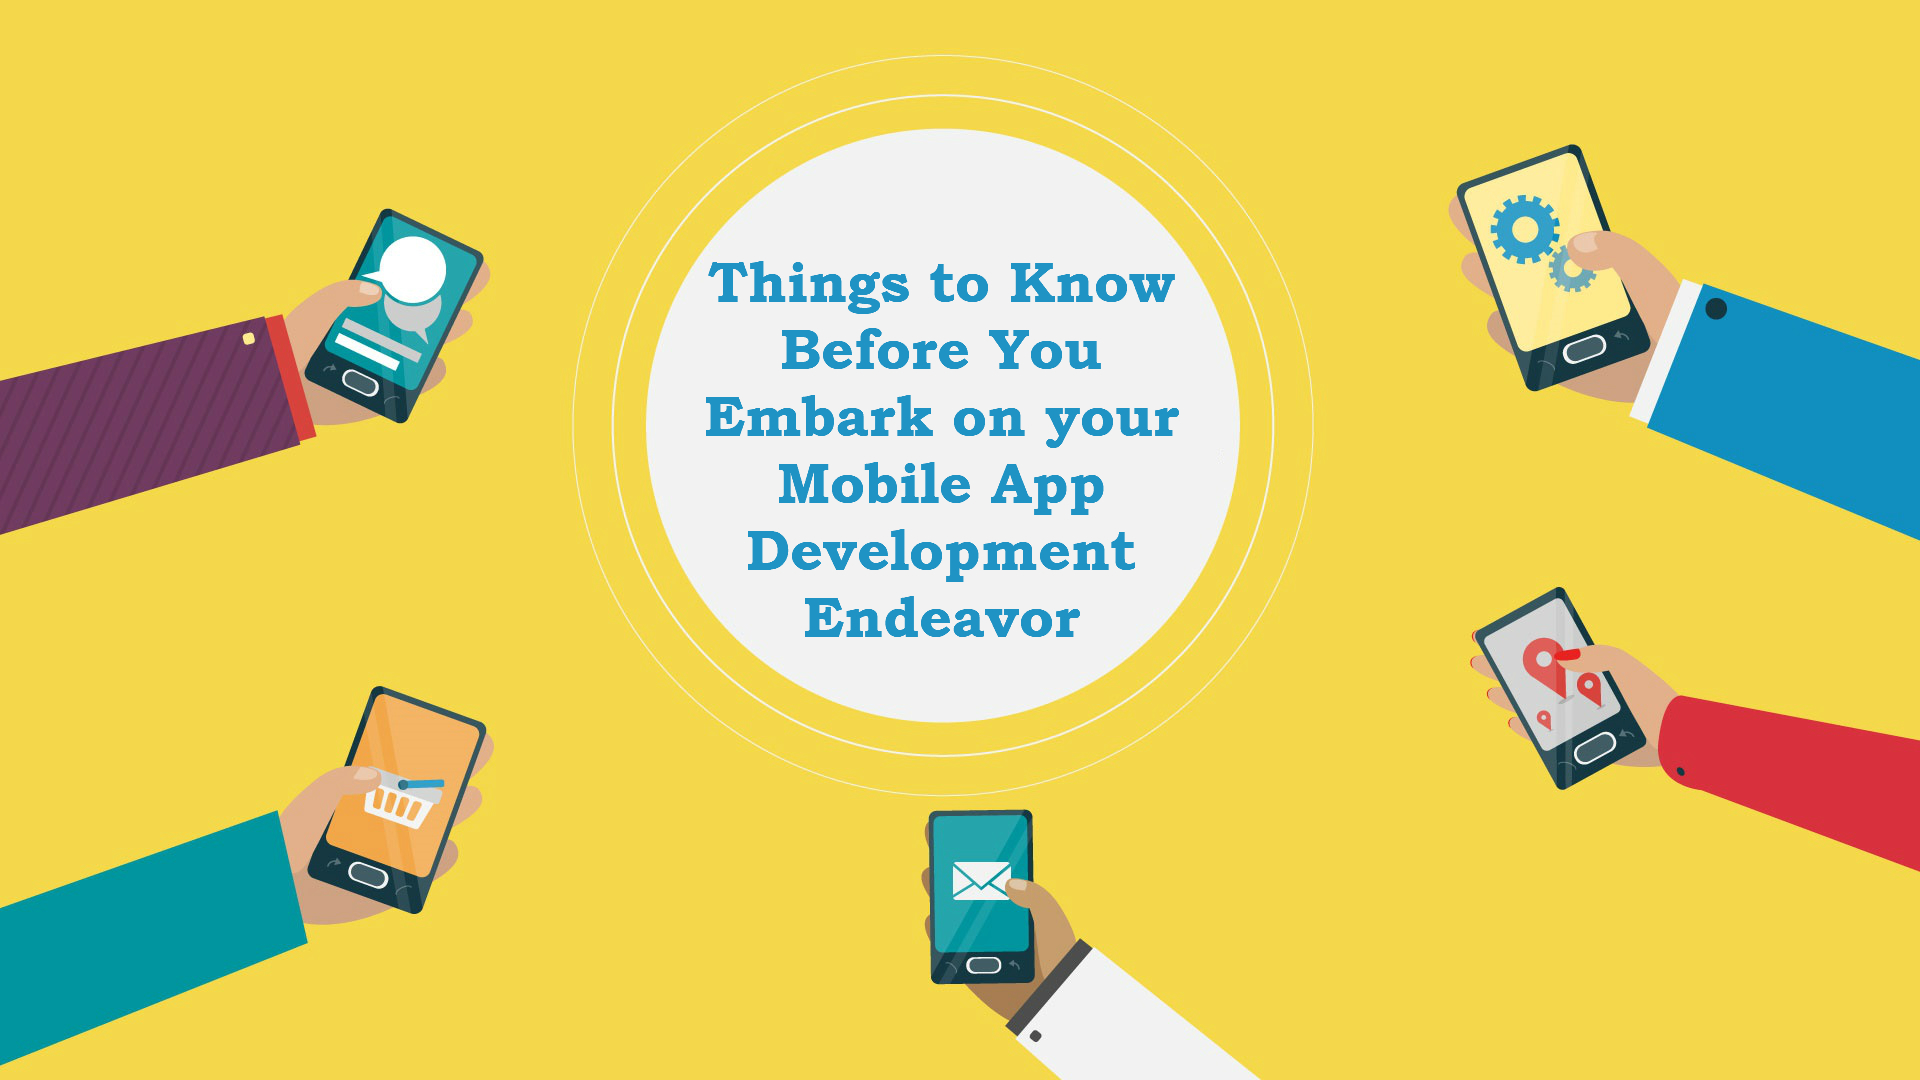 Things to Know Before You Embark on your Mobile App Development Endeavor